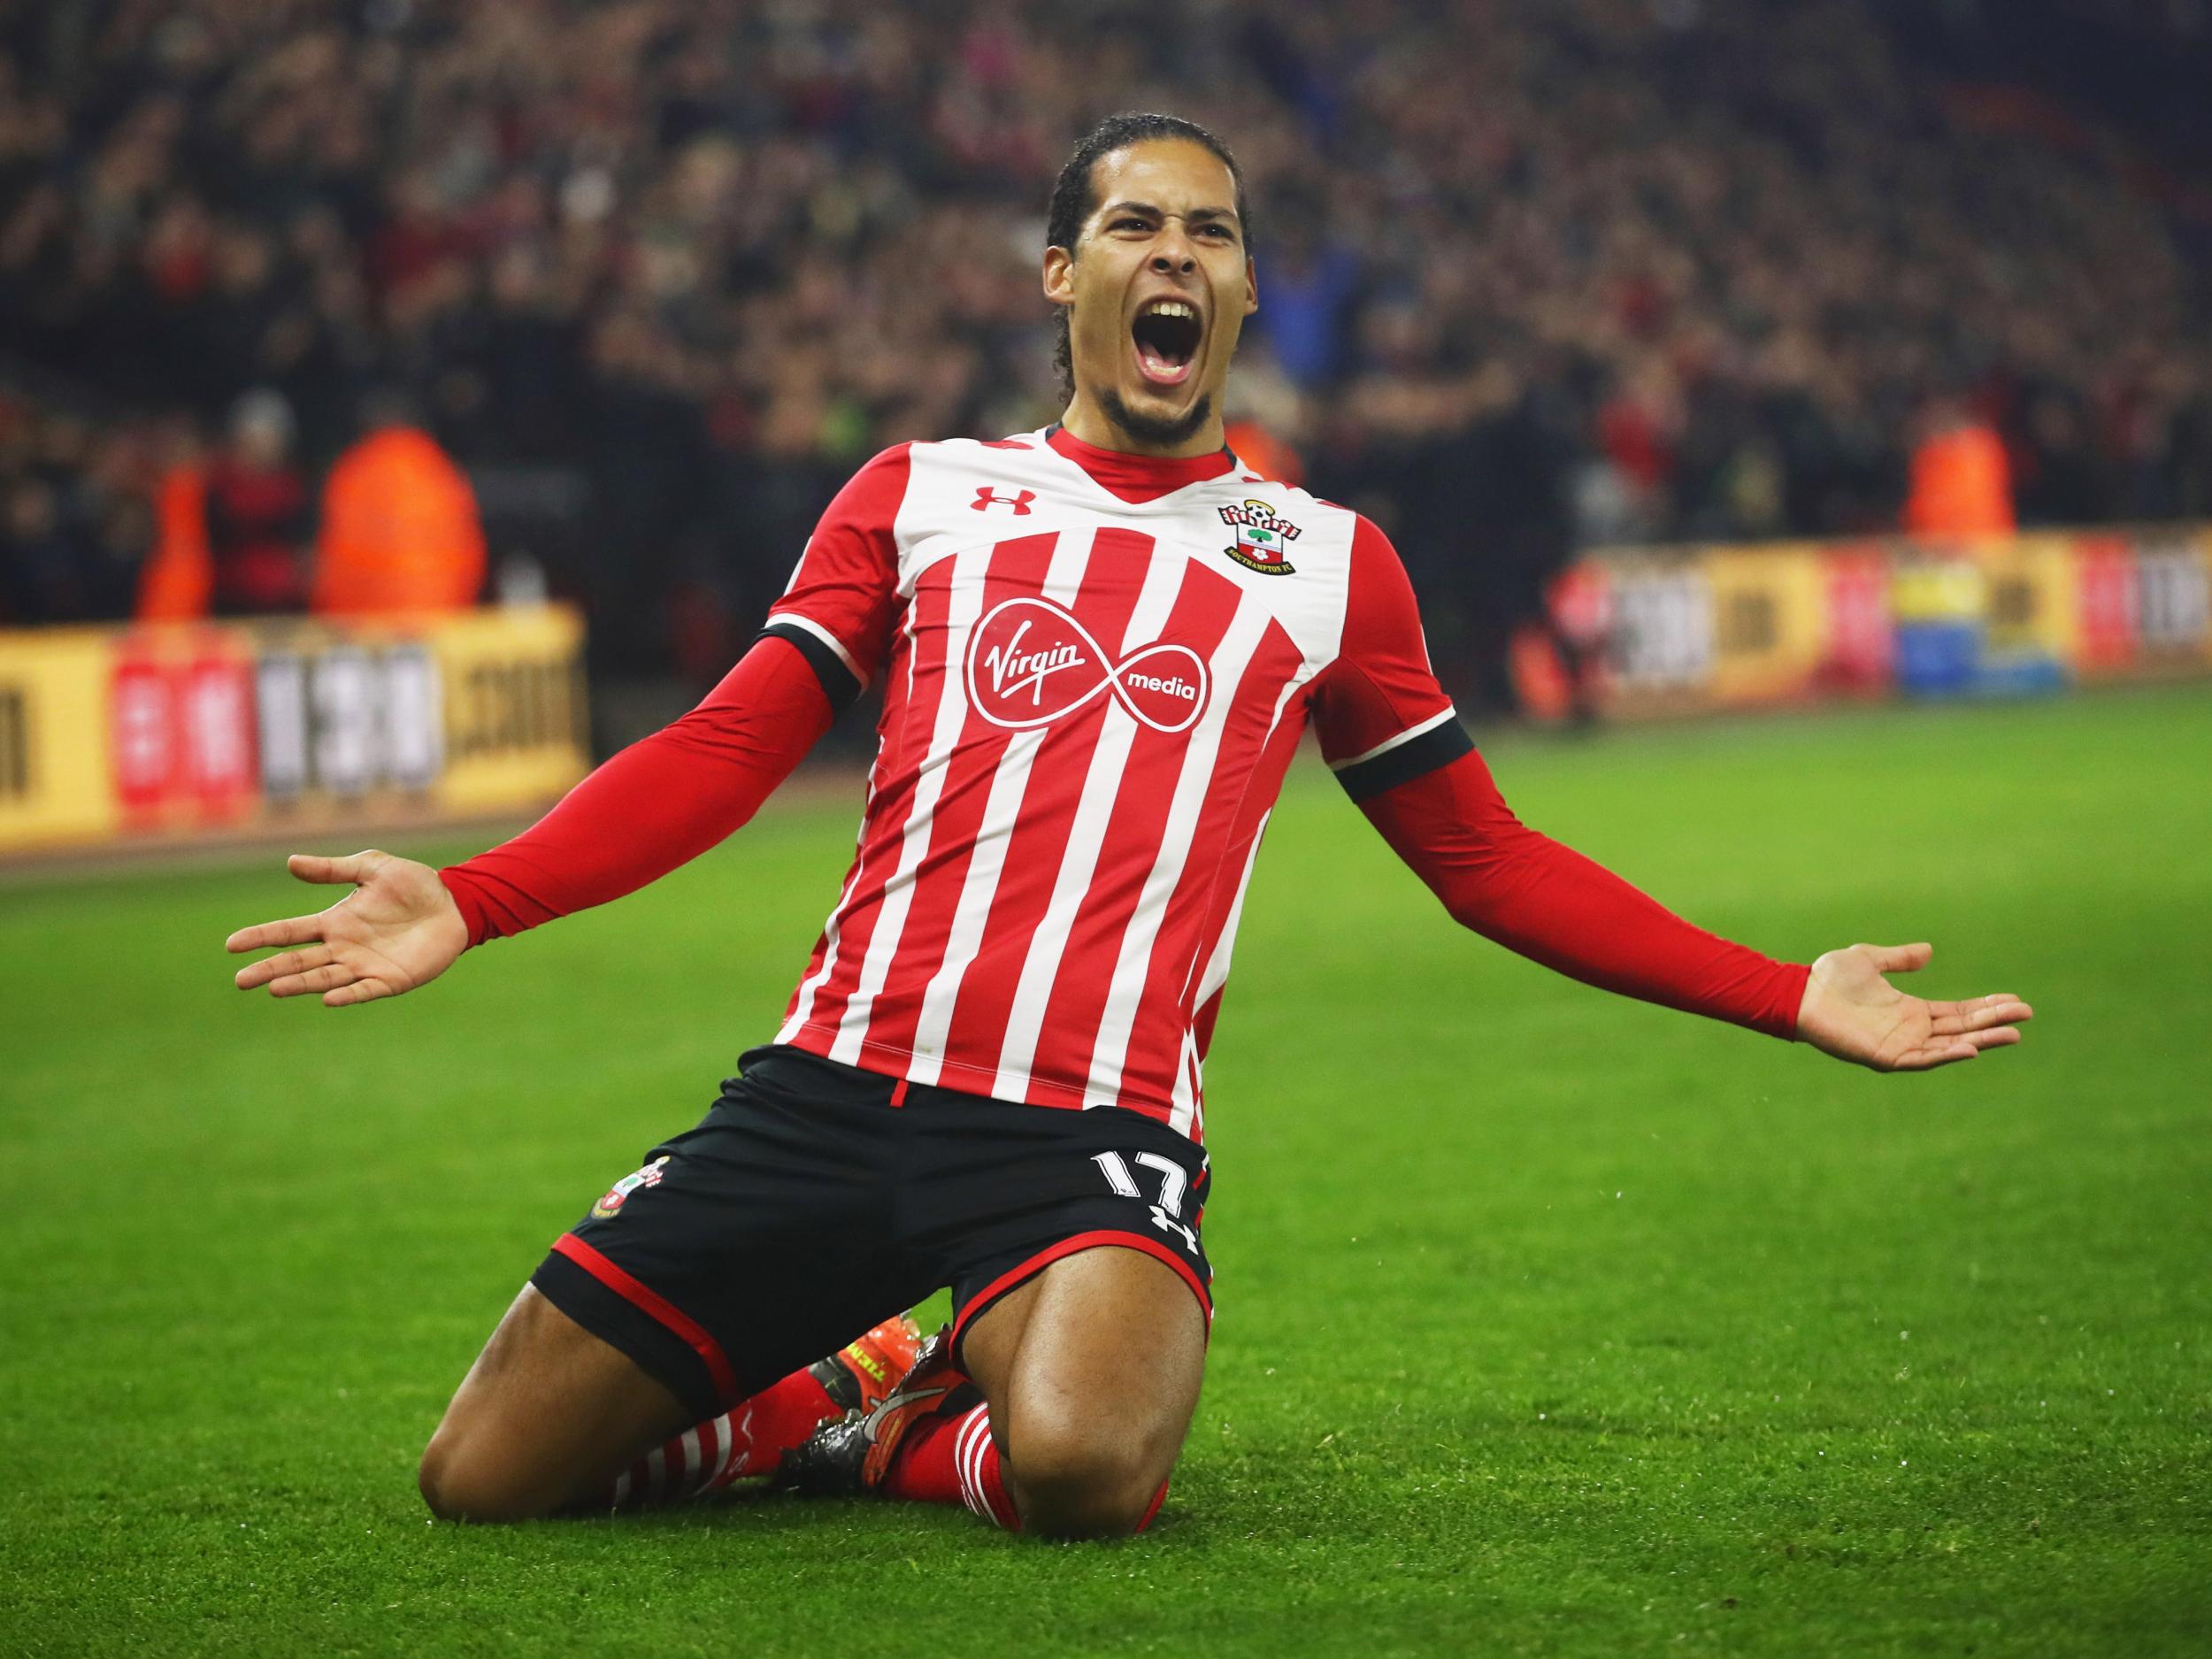 Van Dijk is also a target for Manchester City in the summer